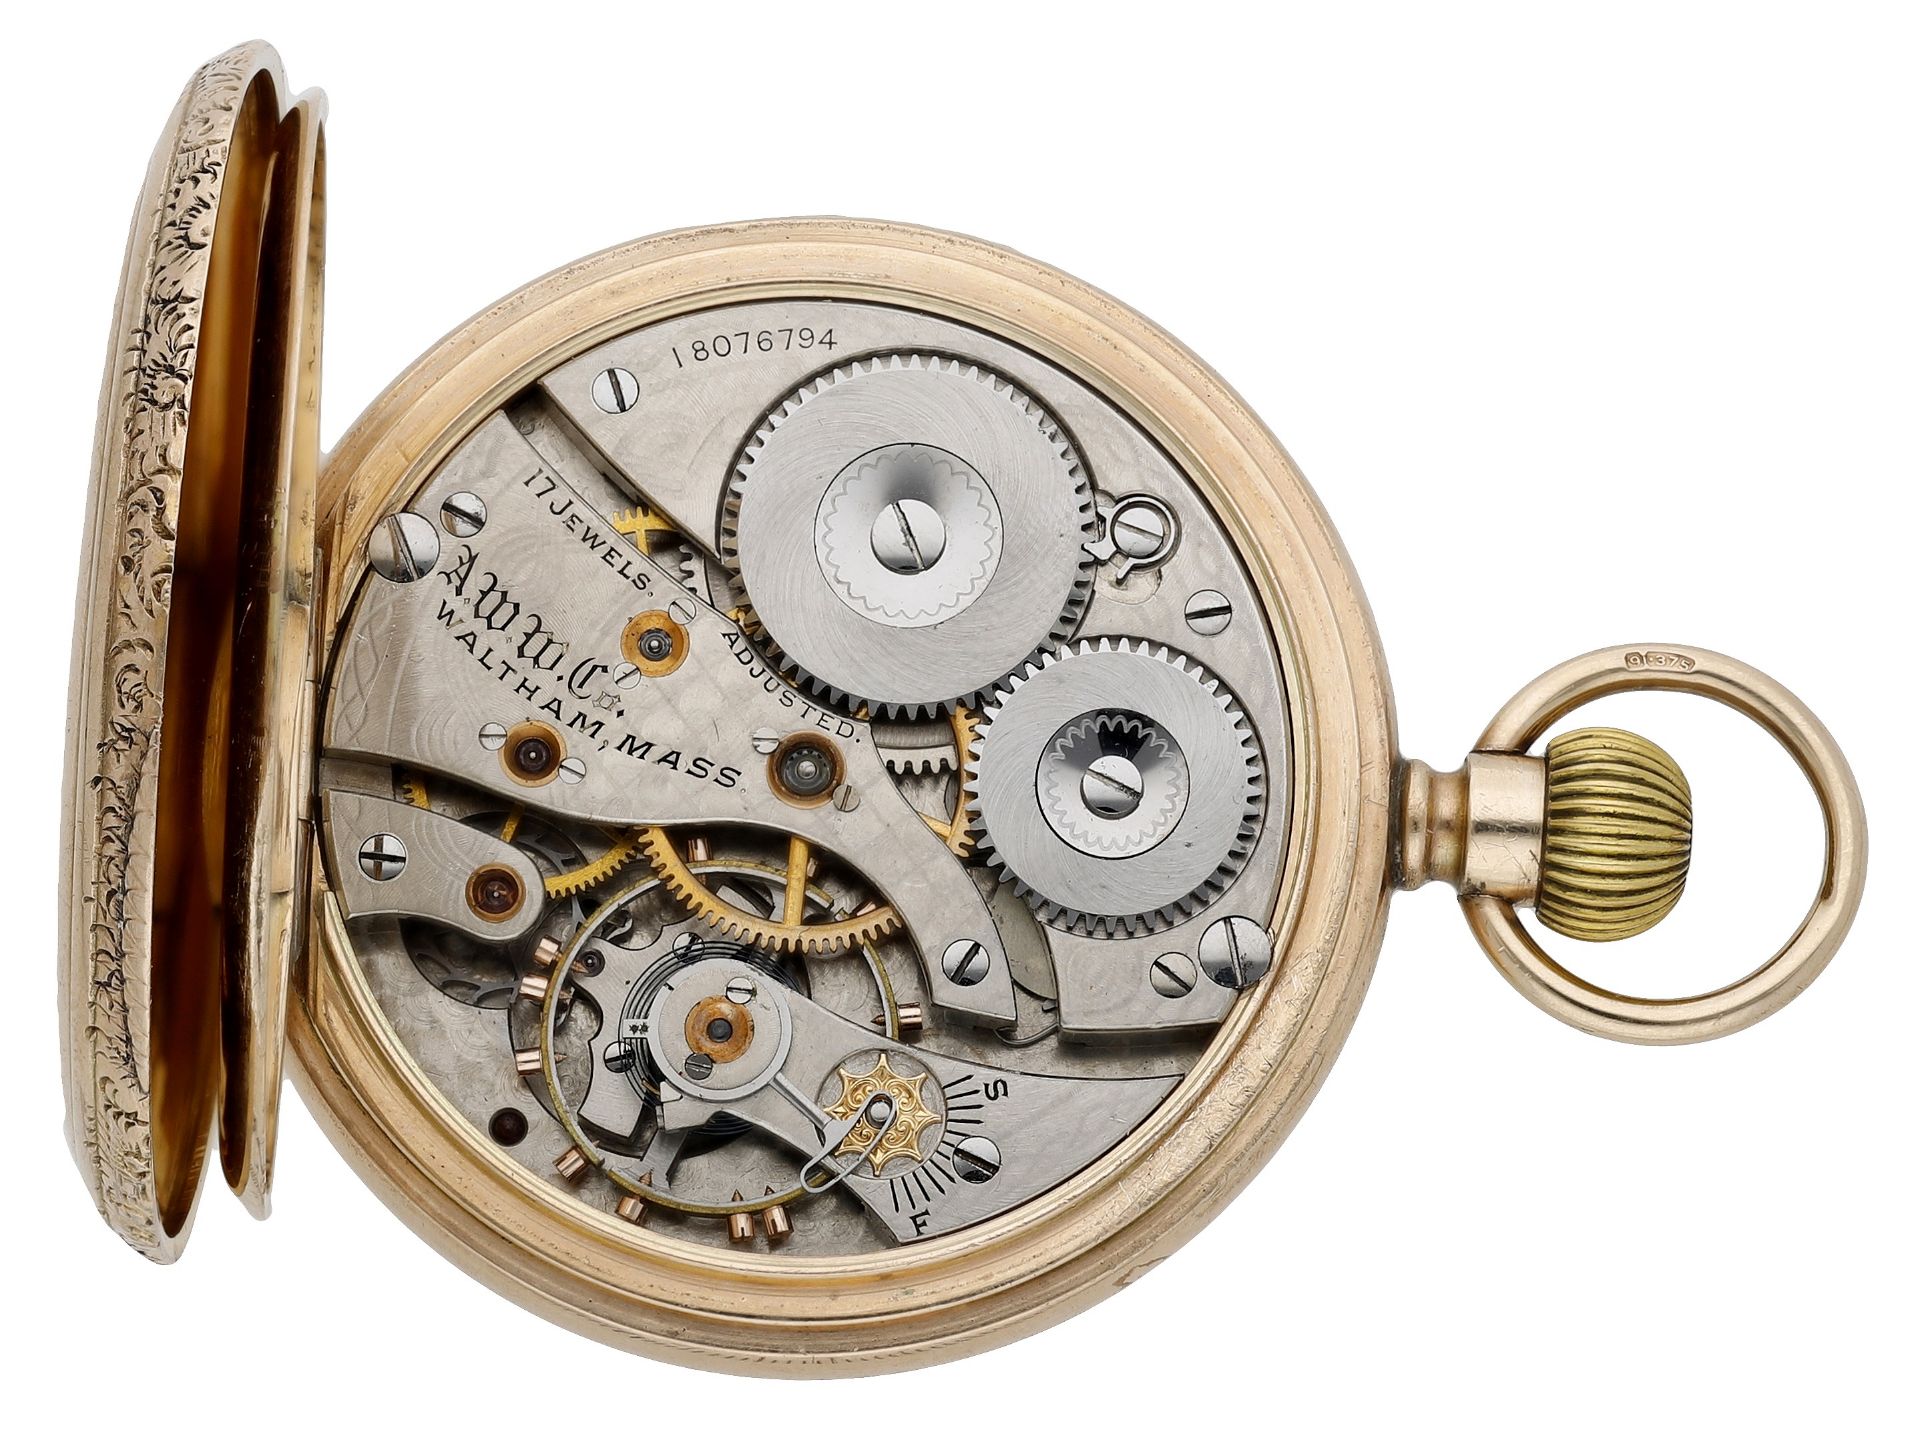 Waltham. A gold open-faced keyless watch, Presented to Sgt. H.E. Holmes D.C.M from the Offic... - Image 2 of 5